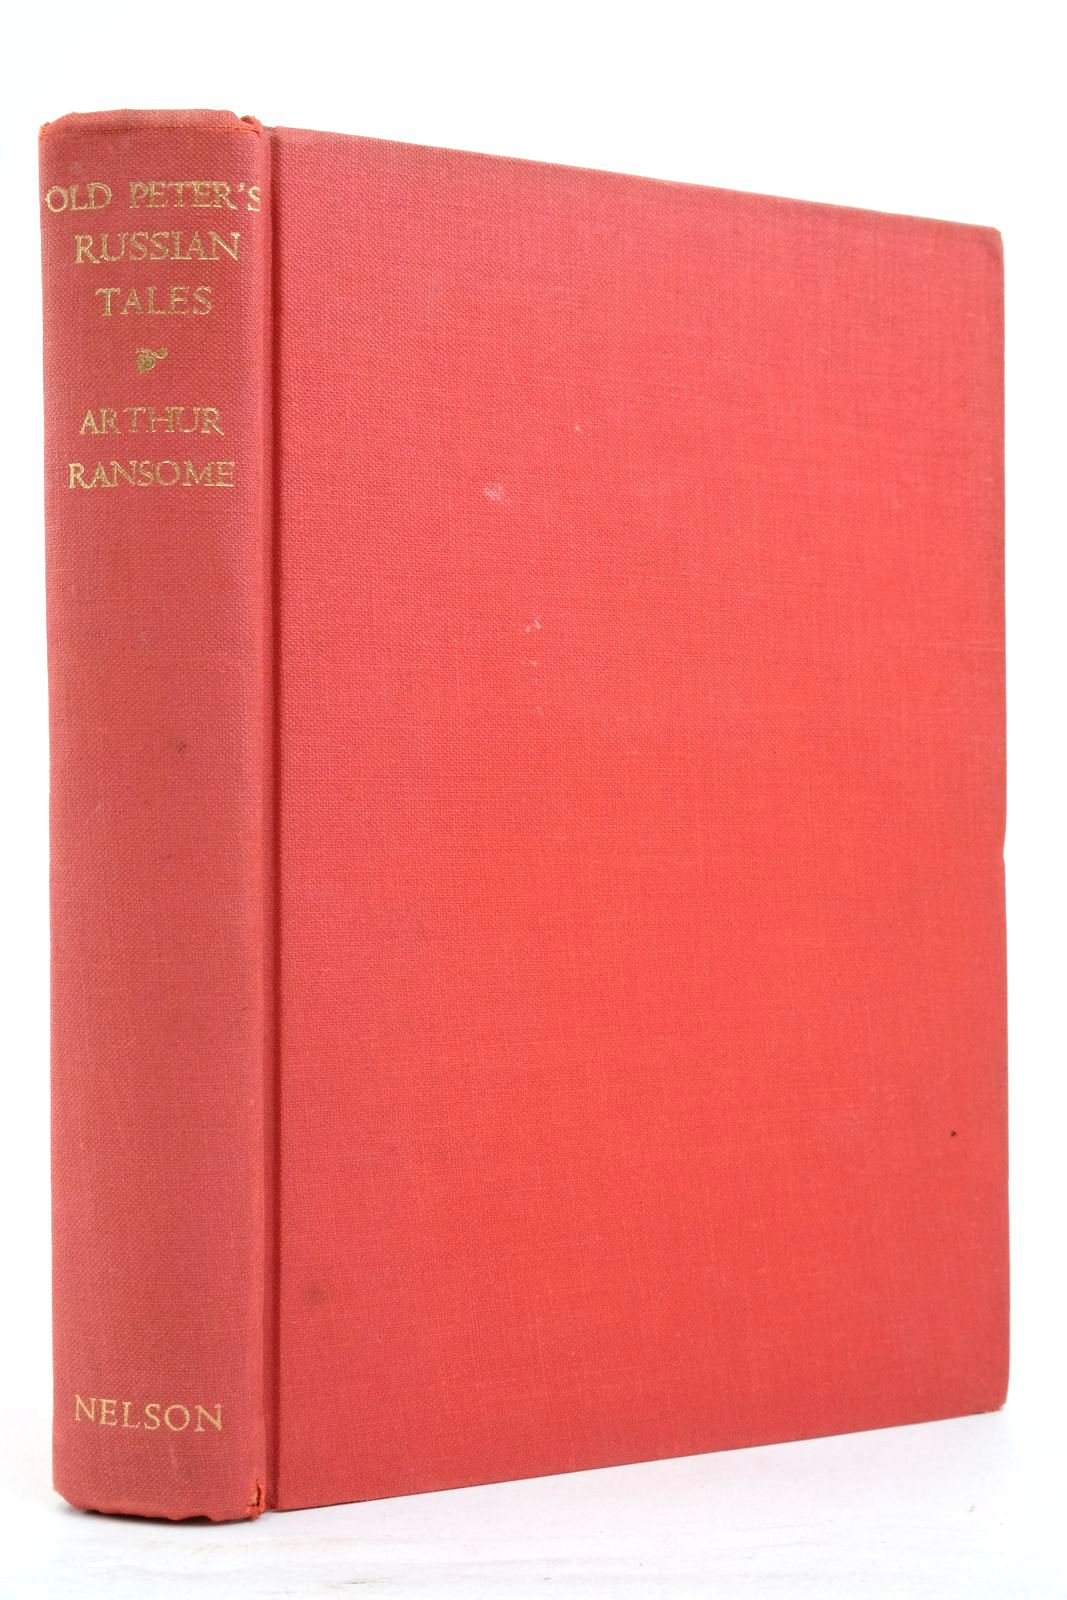 Photo of OLD PETER'S RUSSIAN TALES written by Ransome, Arthur illustrated by Mitrokhin, Dmitri published by Thomas Nelson and Sons Ltd. (STOCK CODE: 2137925)  for sale by Stella & Rose's Books